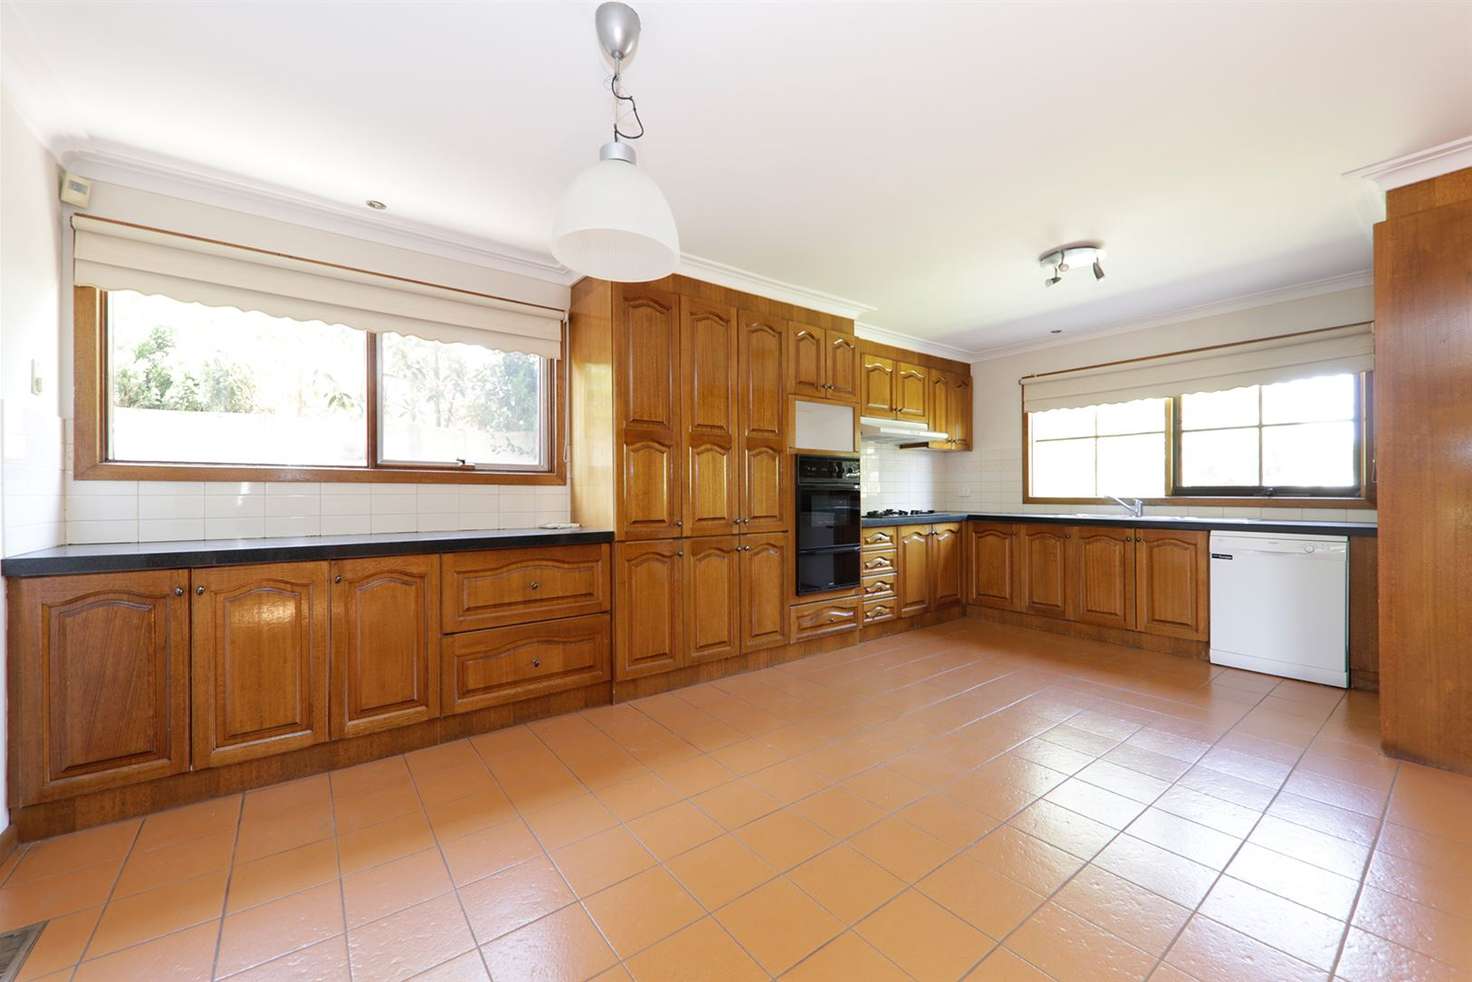 Main view of Homely house listing, 10 Whites Lane, Glen Waverley VIC 3150